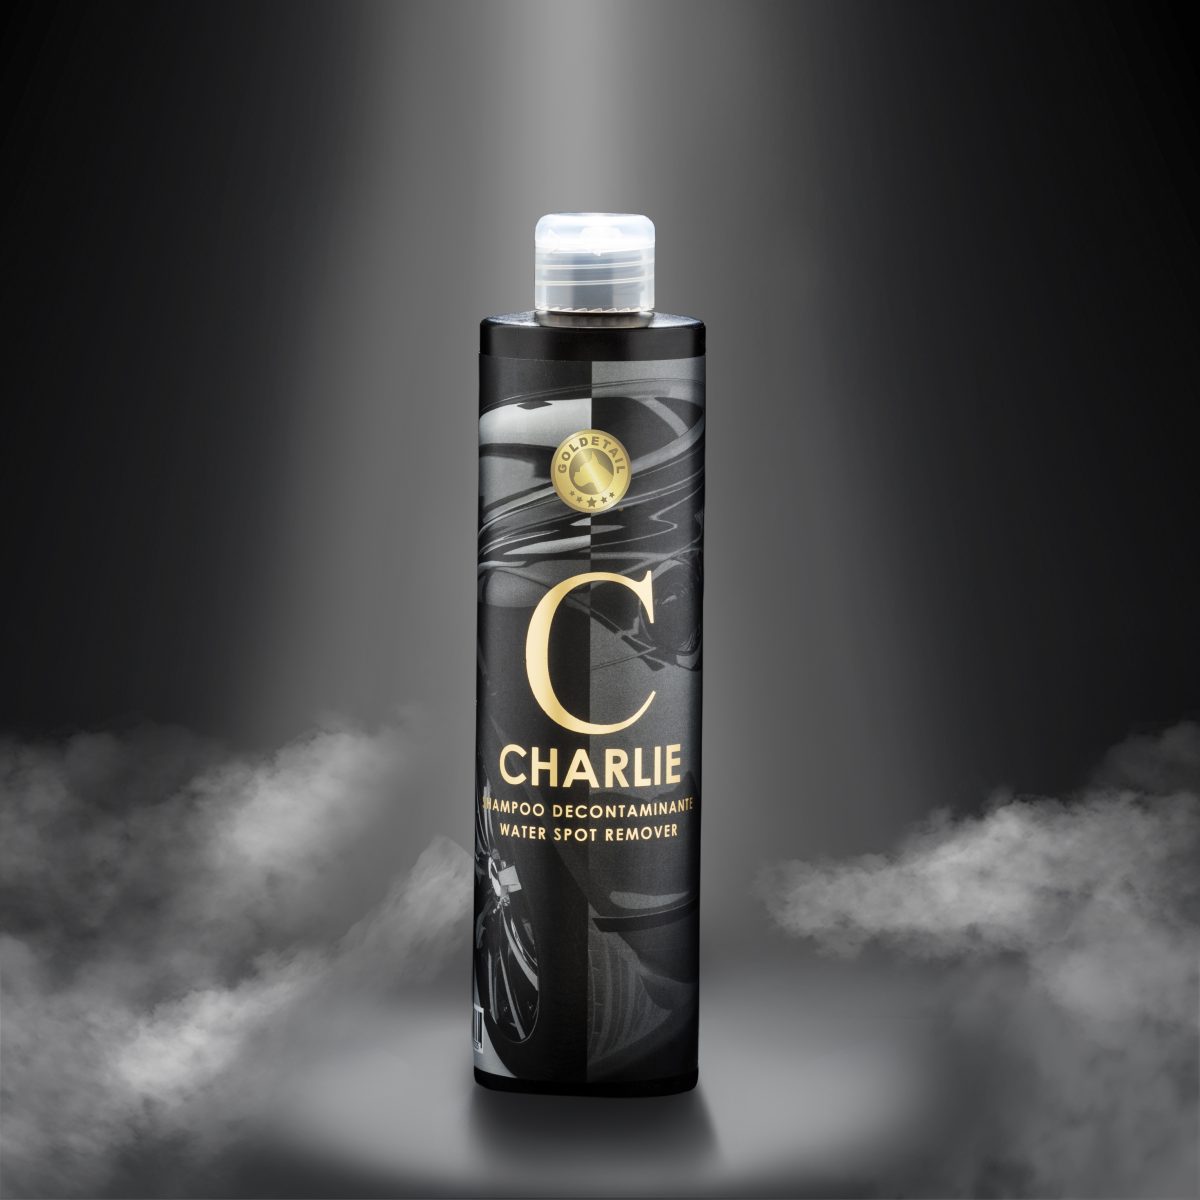 Bottle of Charlie Water Spot remover